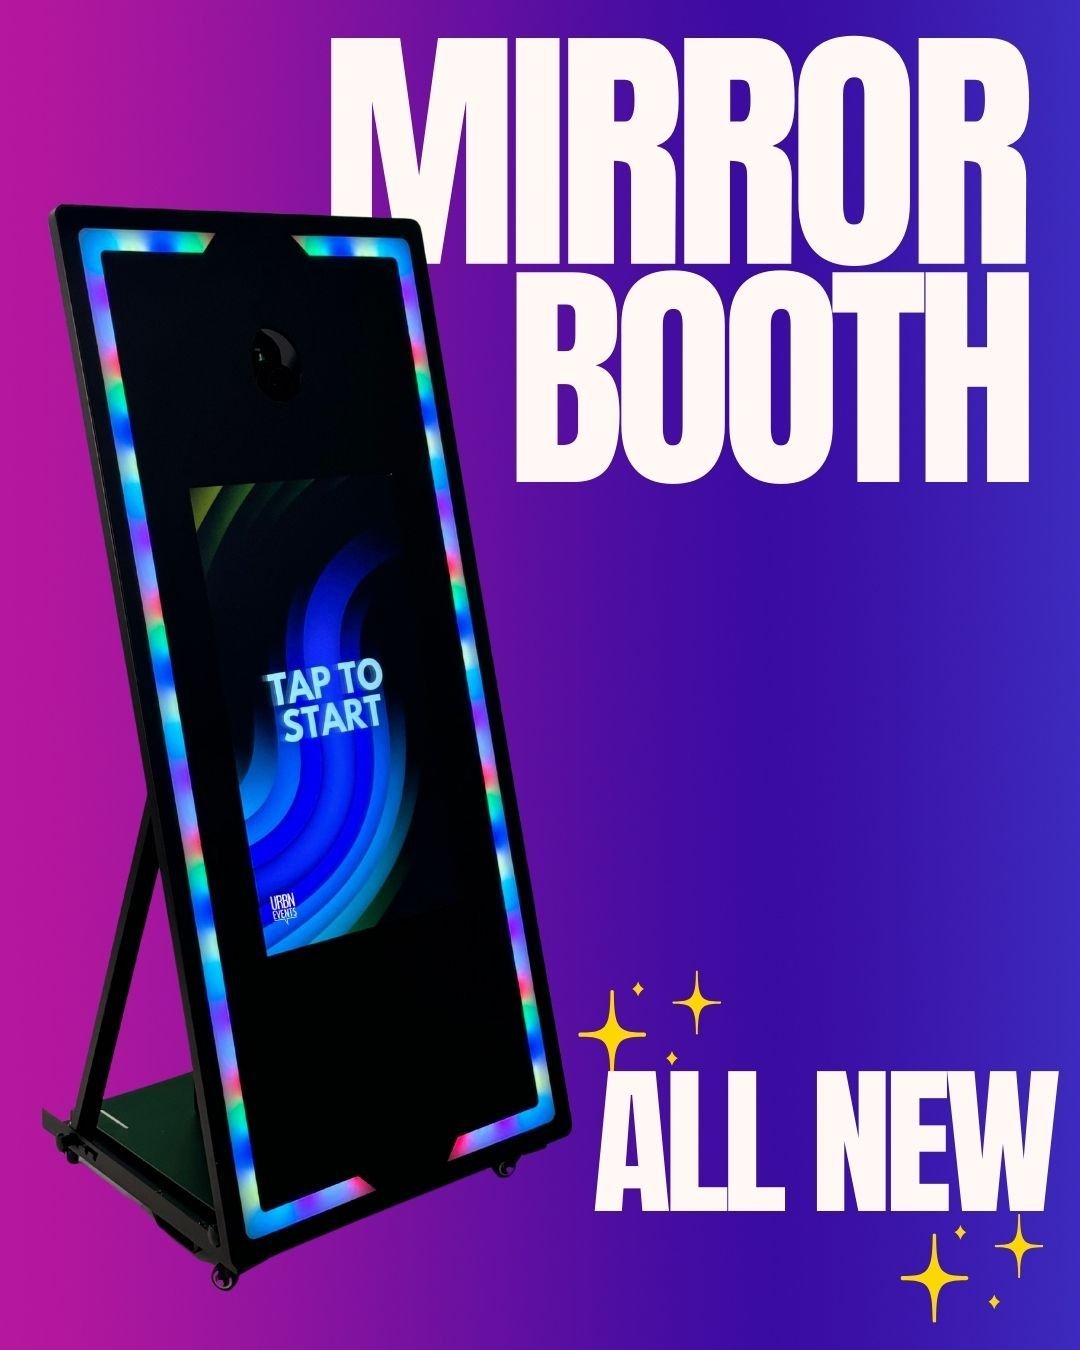 Mirror, mirror on the wall, who's the life of the party after all? 🎉✨ URBNevents presents the ultimate selfie experience with our Mirror Booth! #MirrorBooth #URBNevents